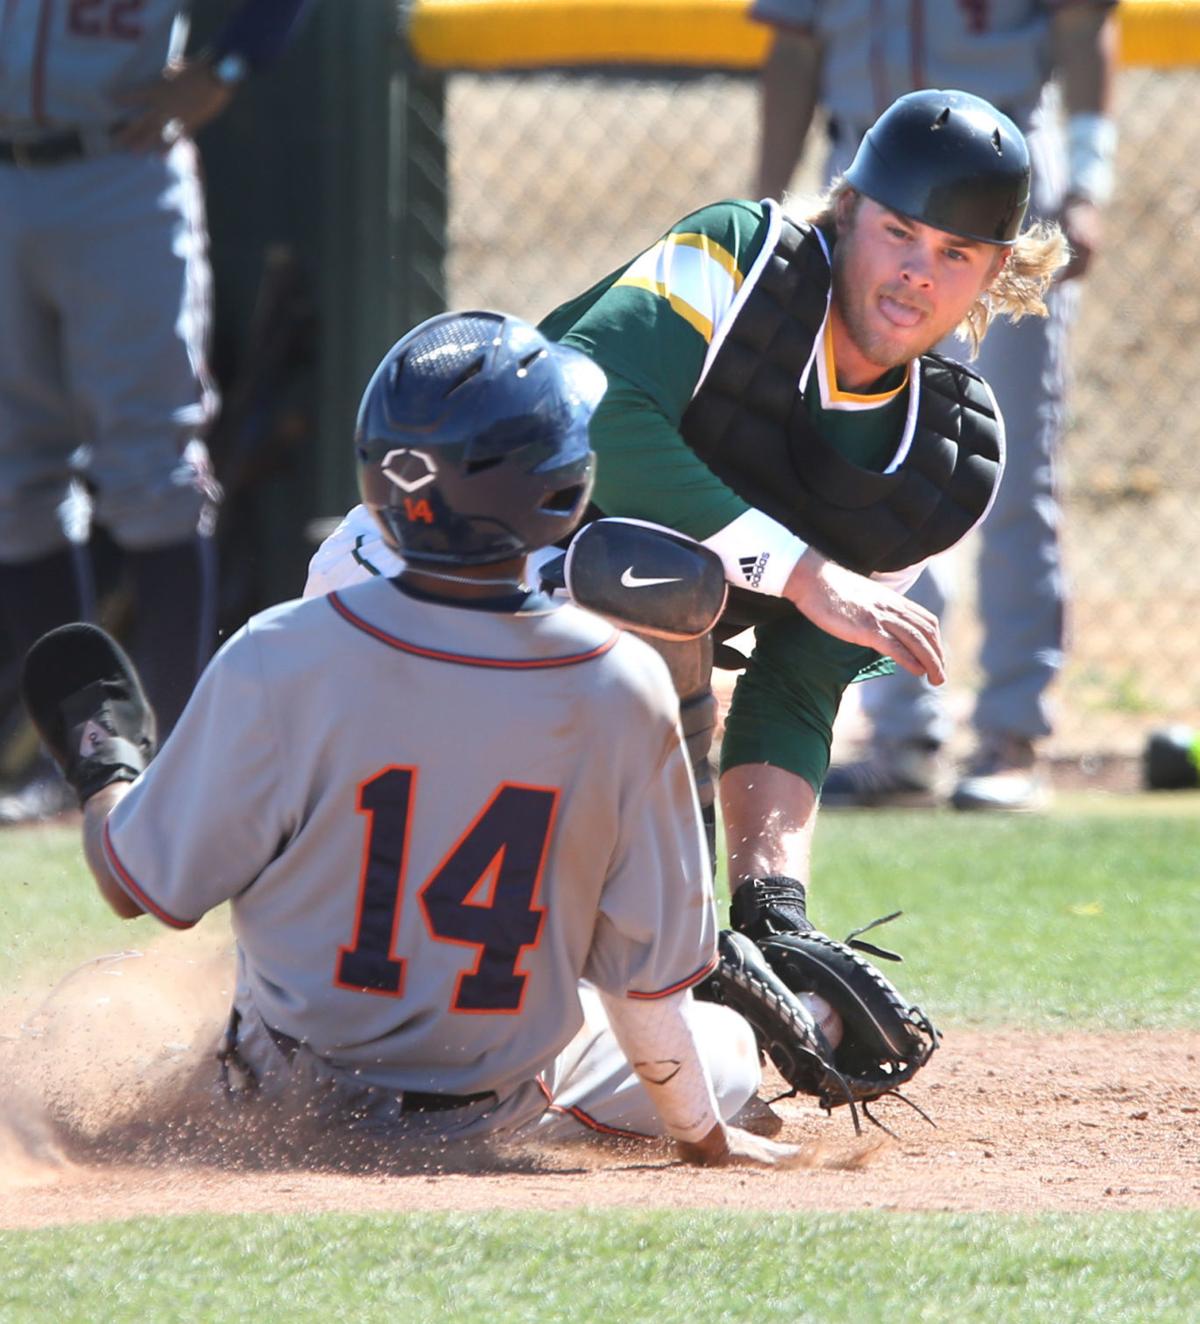 Seth Beckstead, CAC catcher, with the tag in 2020 game. He tripled and homered in game one in Yuma Saturday.